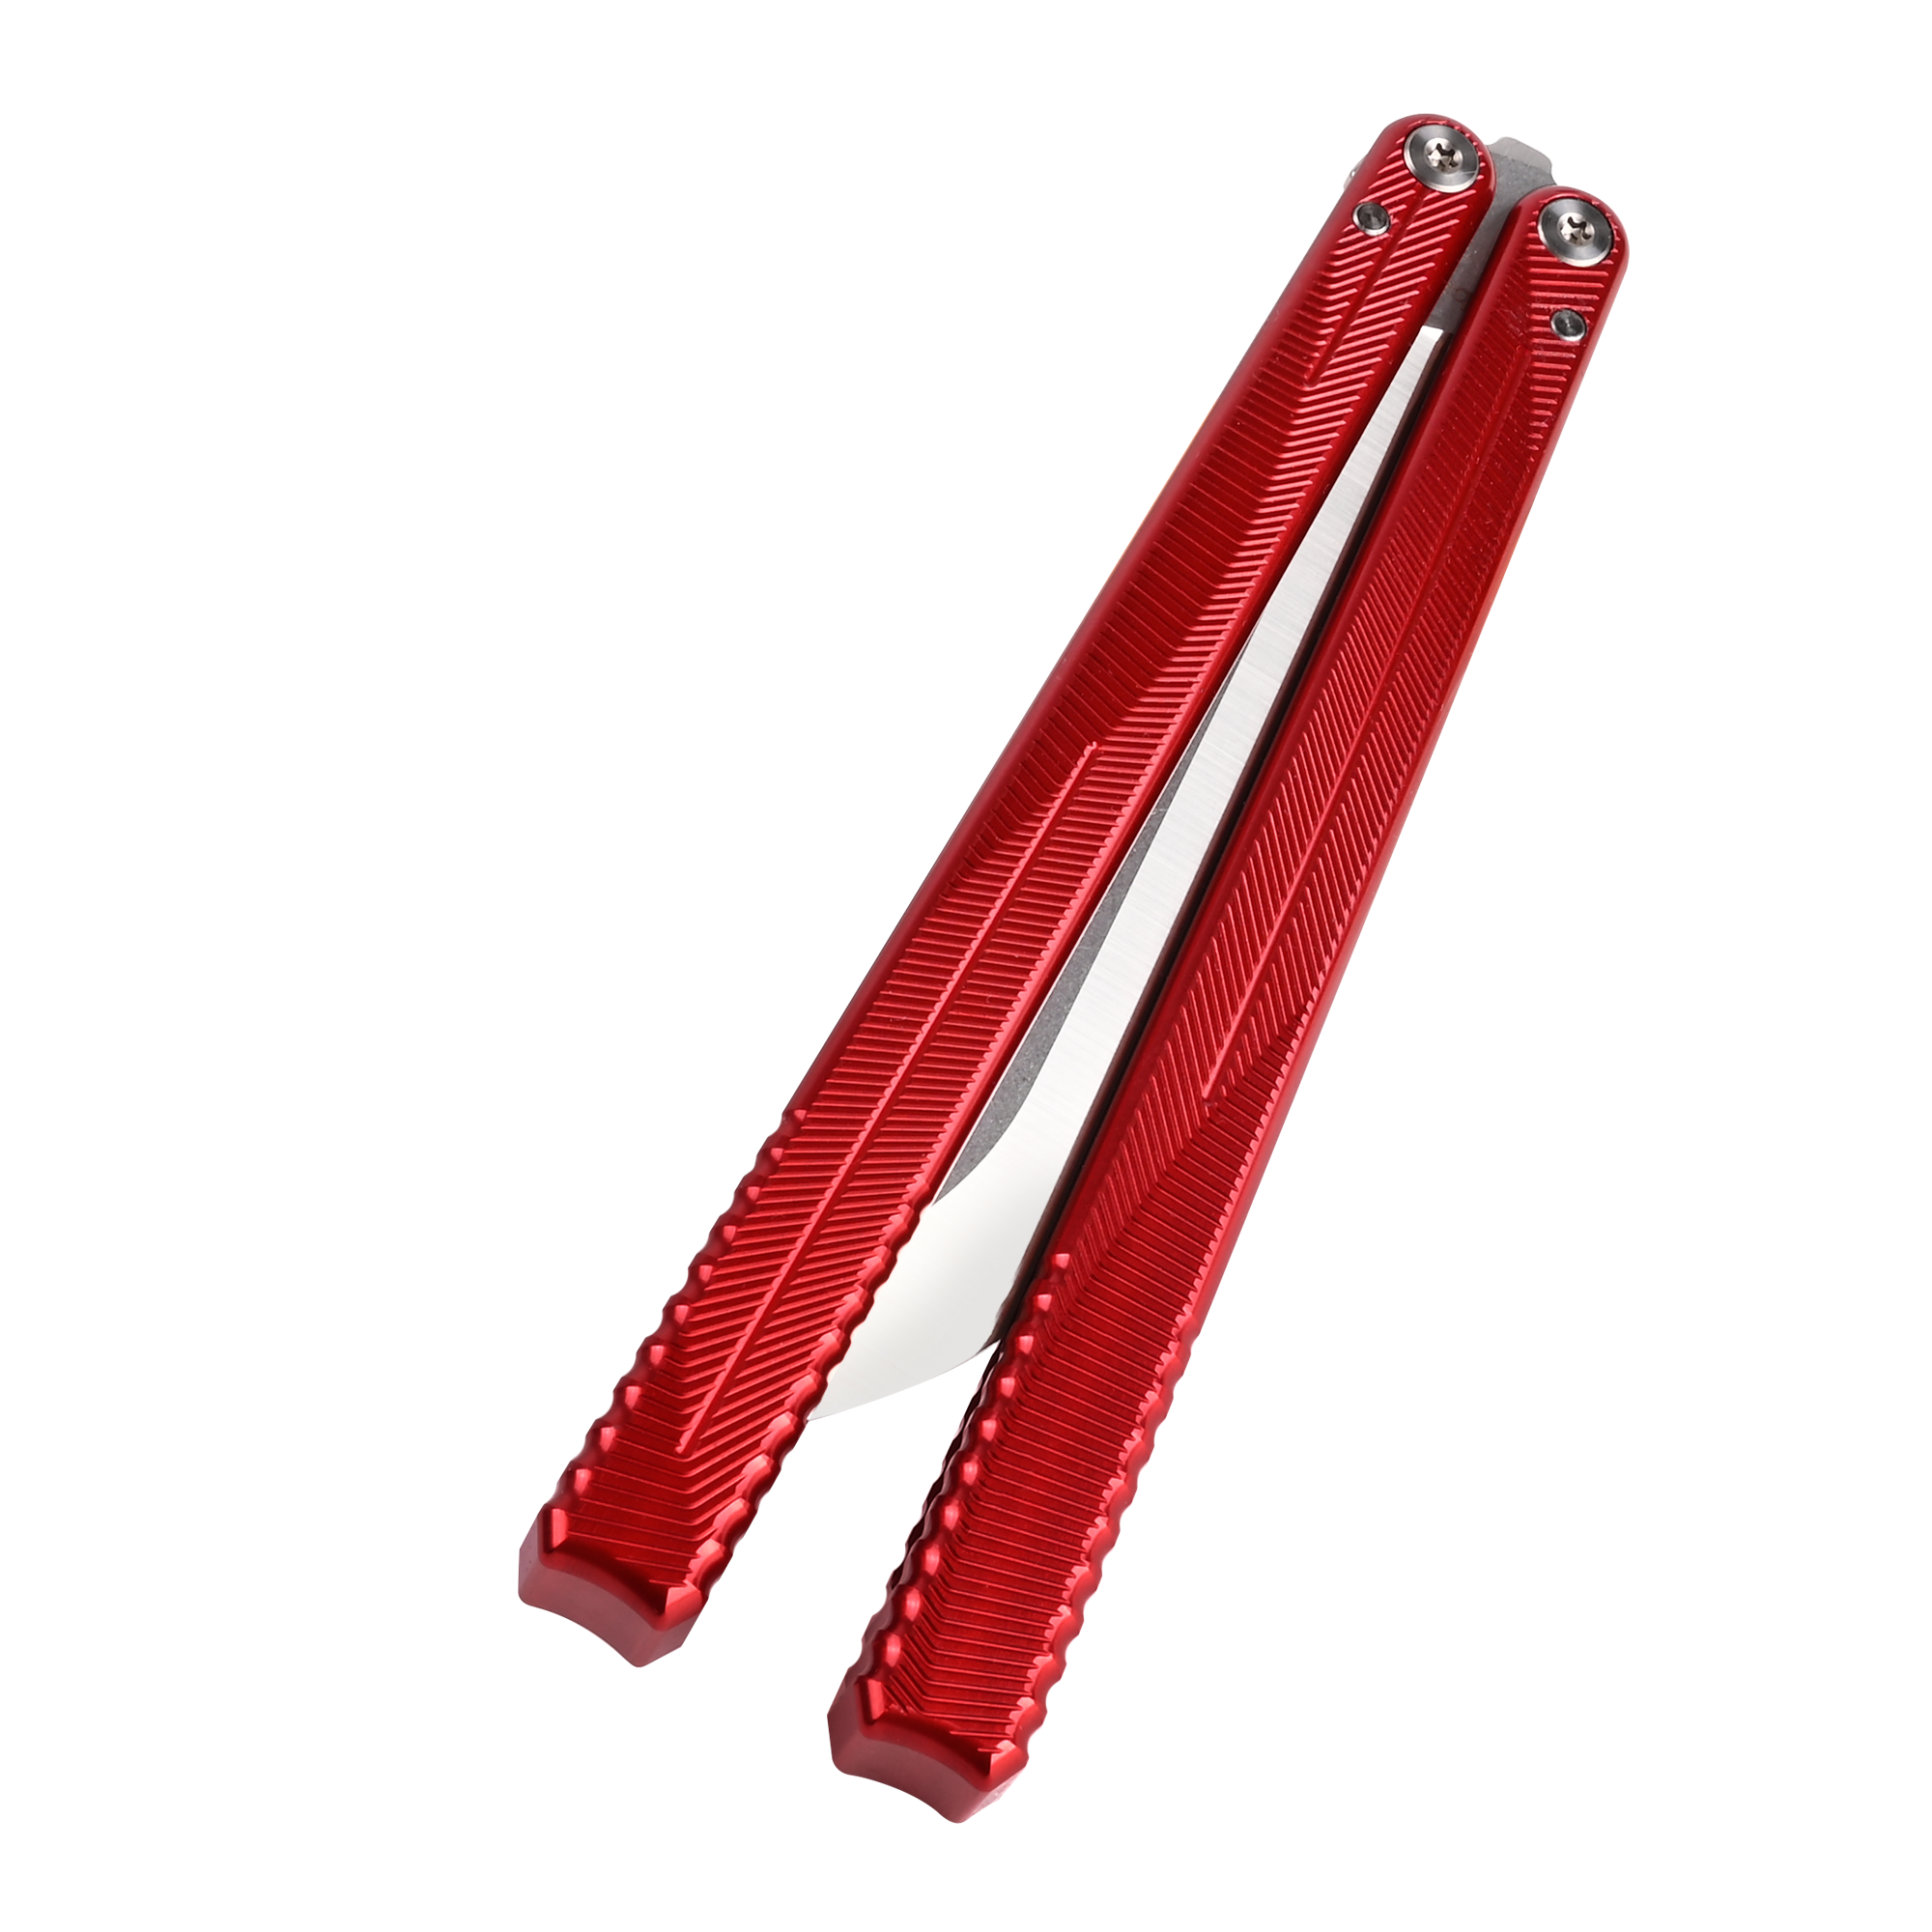 Nabalils Hydra Butterfly Knife Balisong Trainer Dull Blade-Red-Closed-1